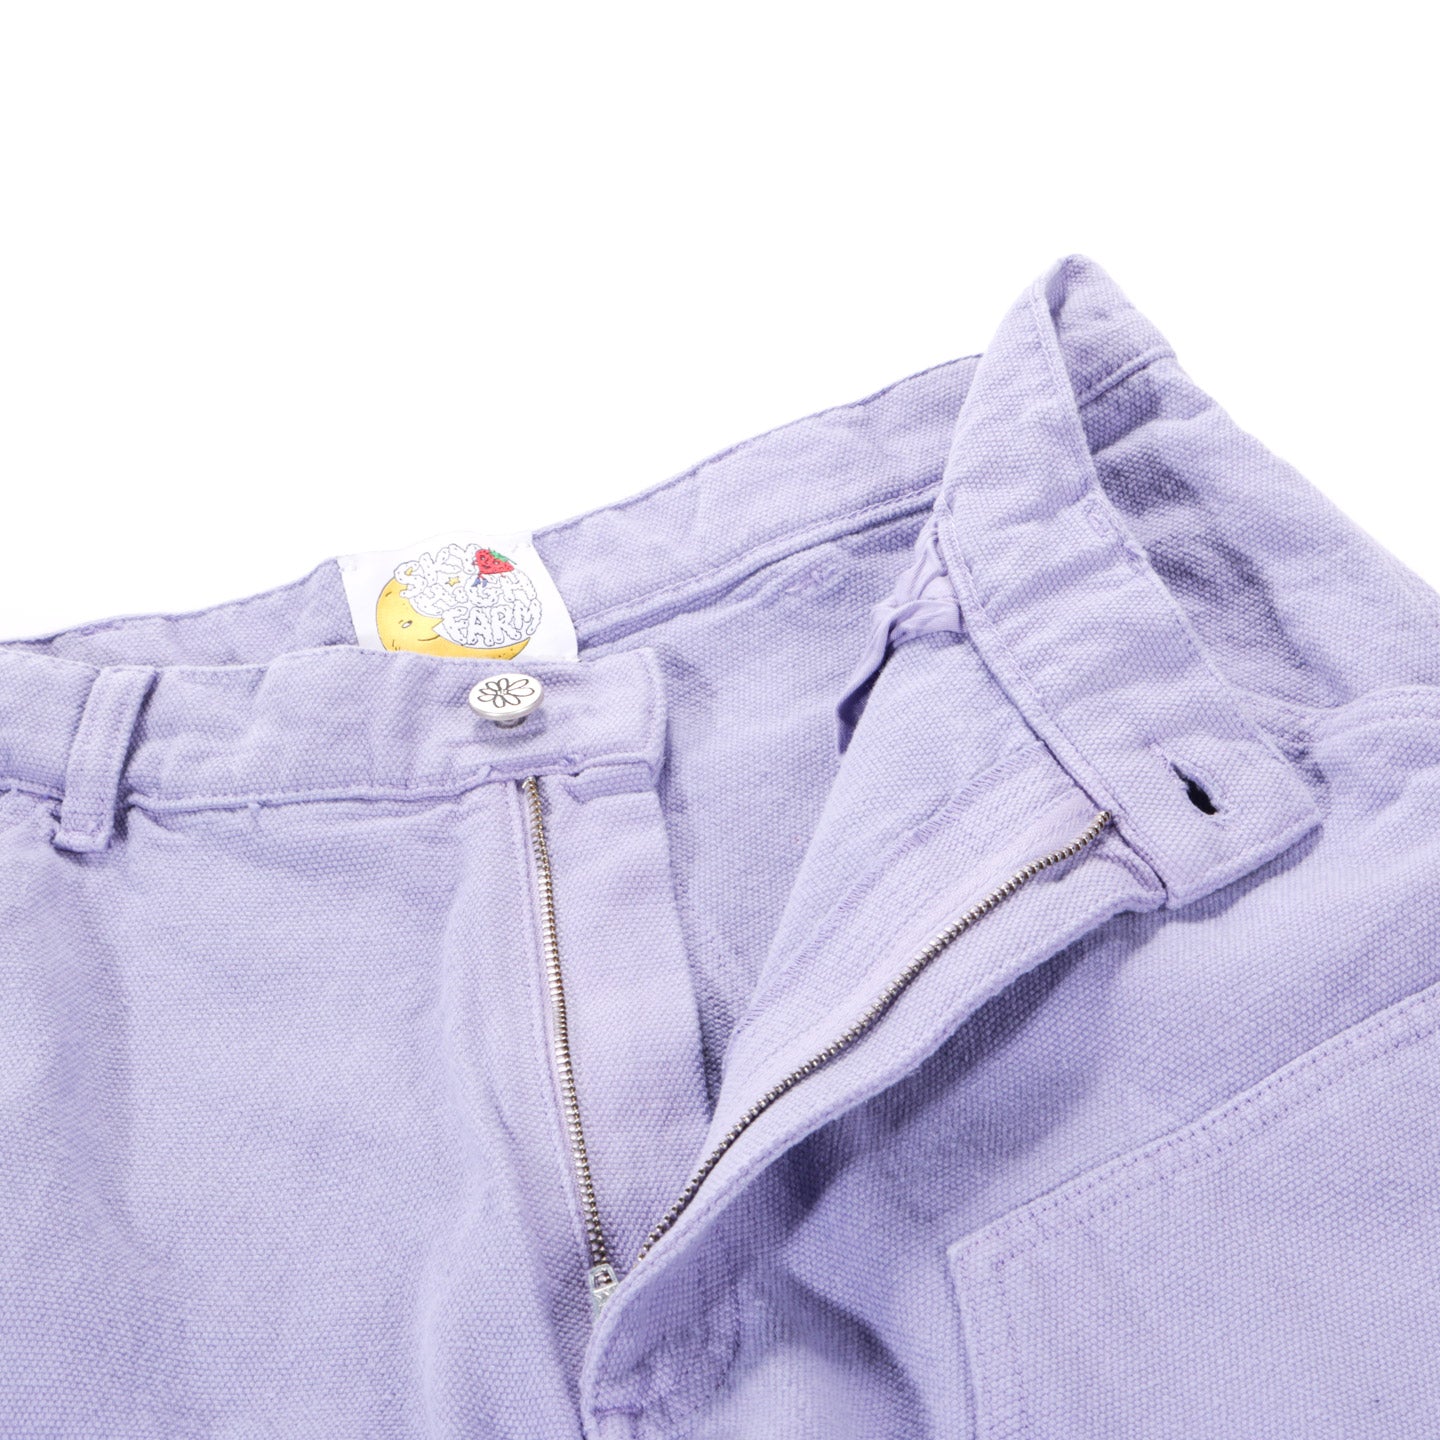 SKY HIGH FARM WORKWEAR DOUBLE KNEE PANTS LAVENDER | TODAY CLOTHING